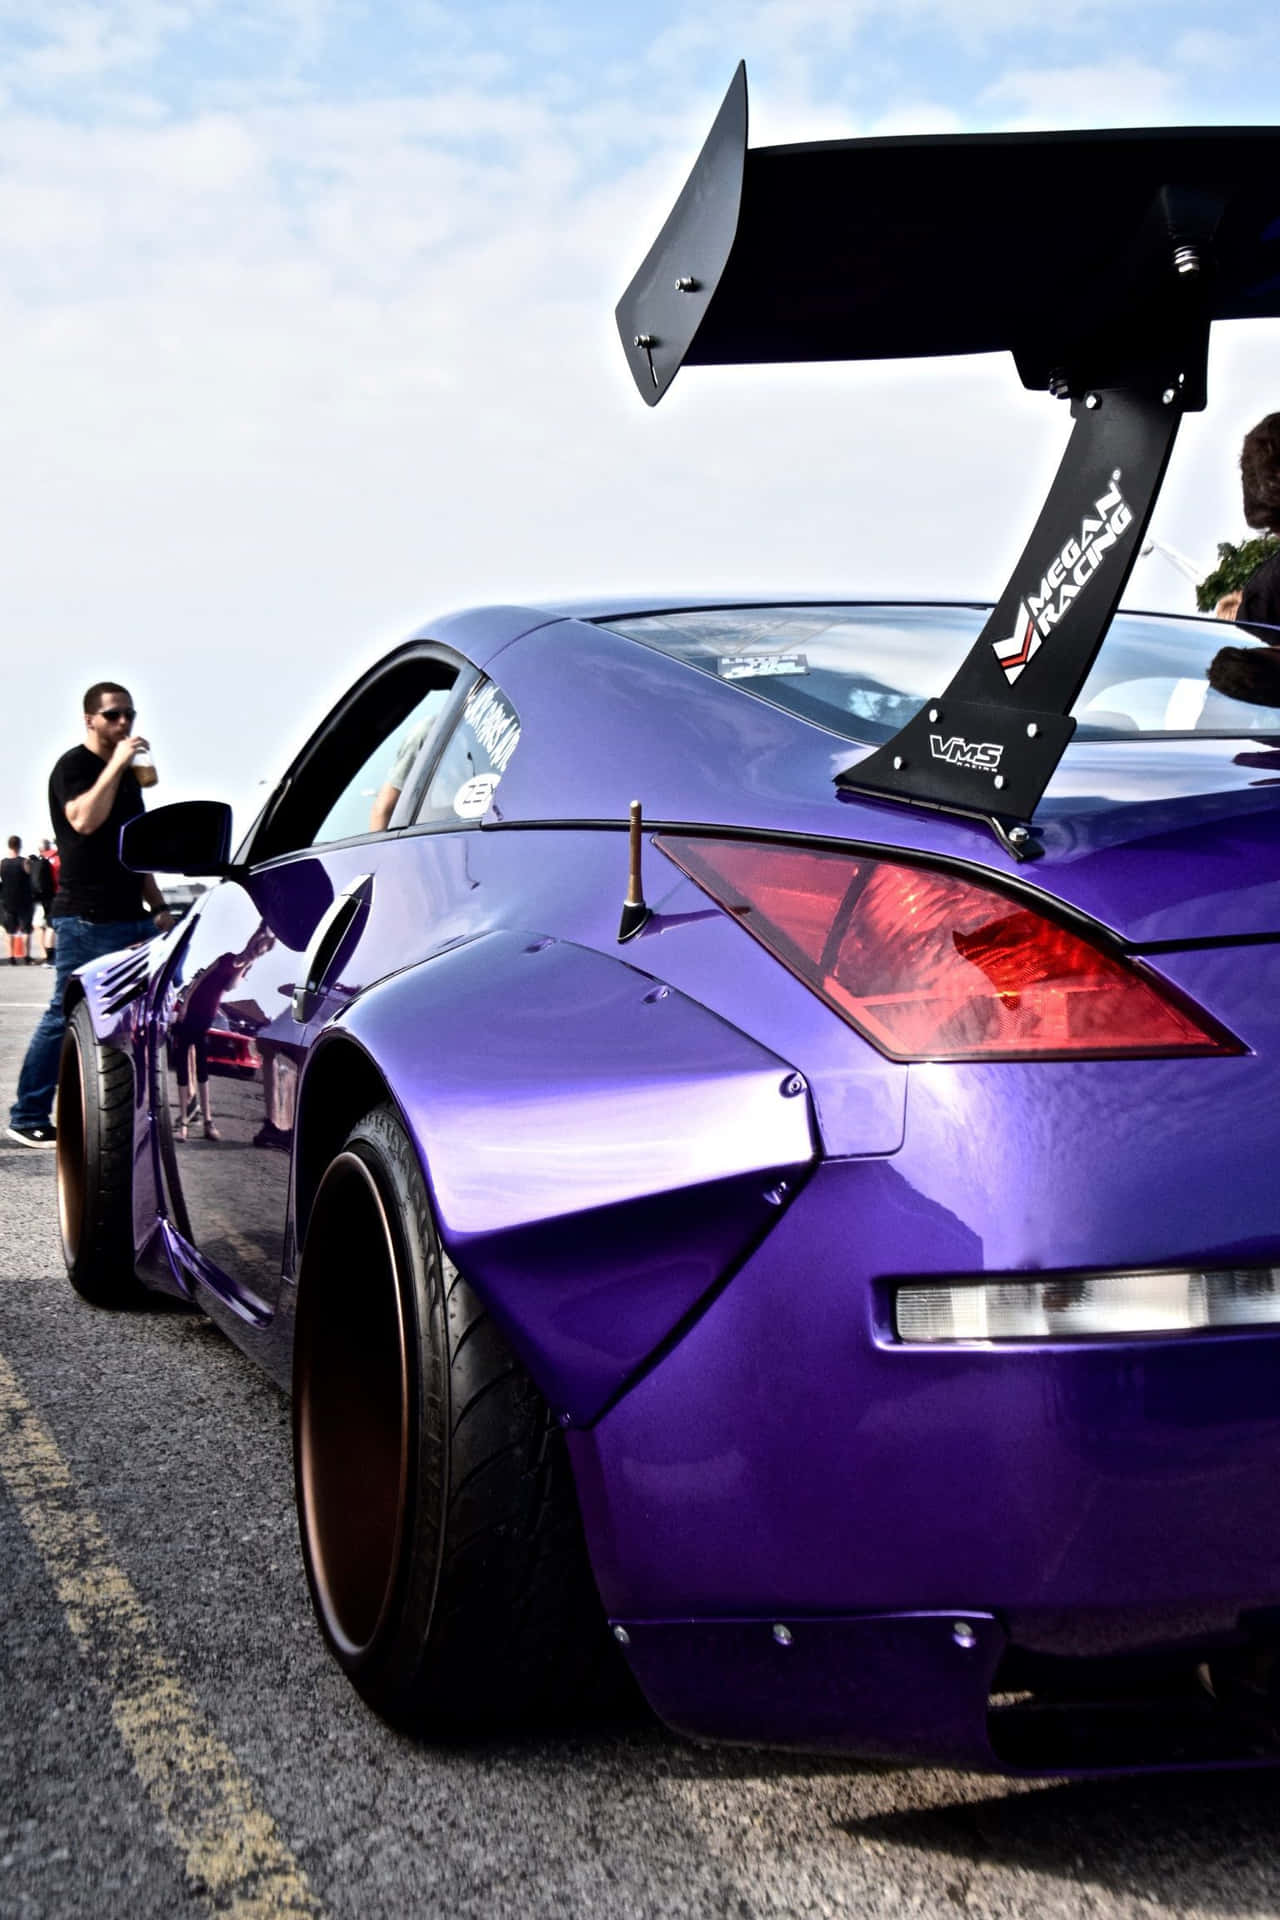 Get ready for a thrilling drive in the Nissan 350Z Wallpaper